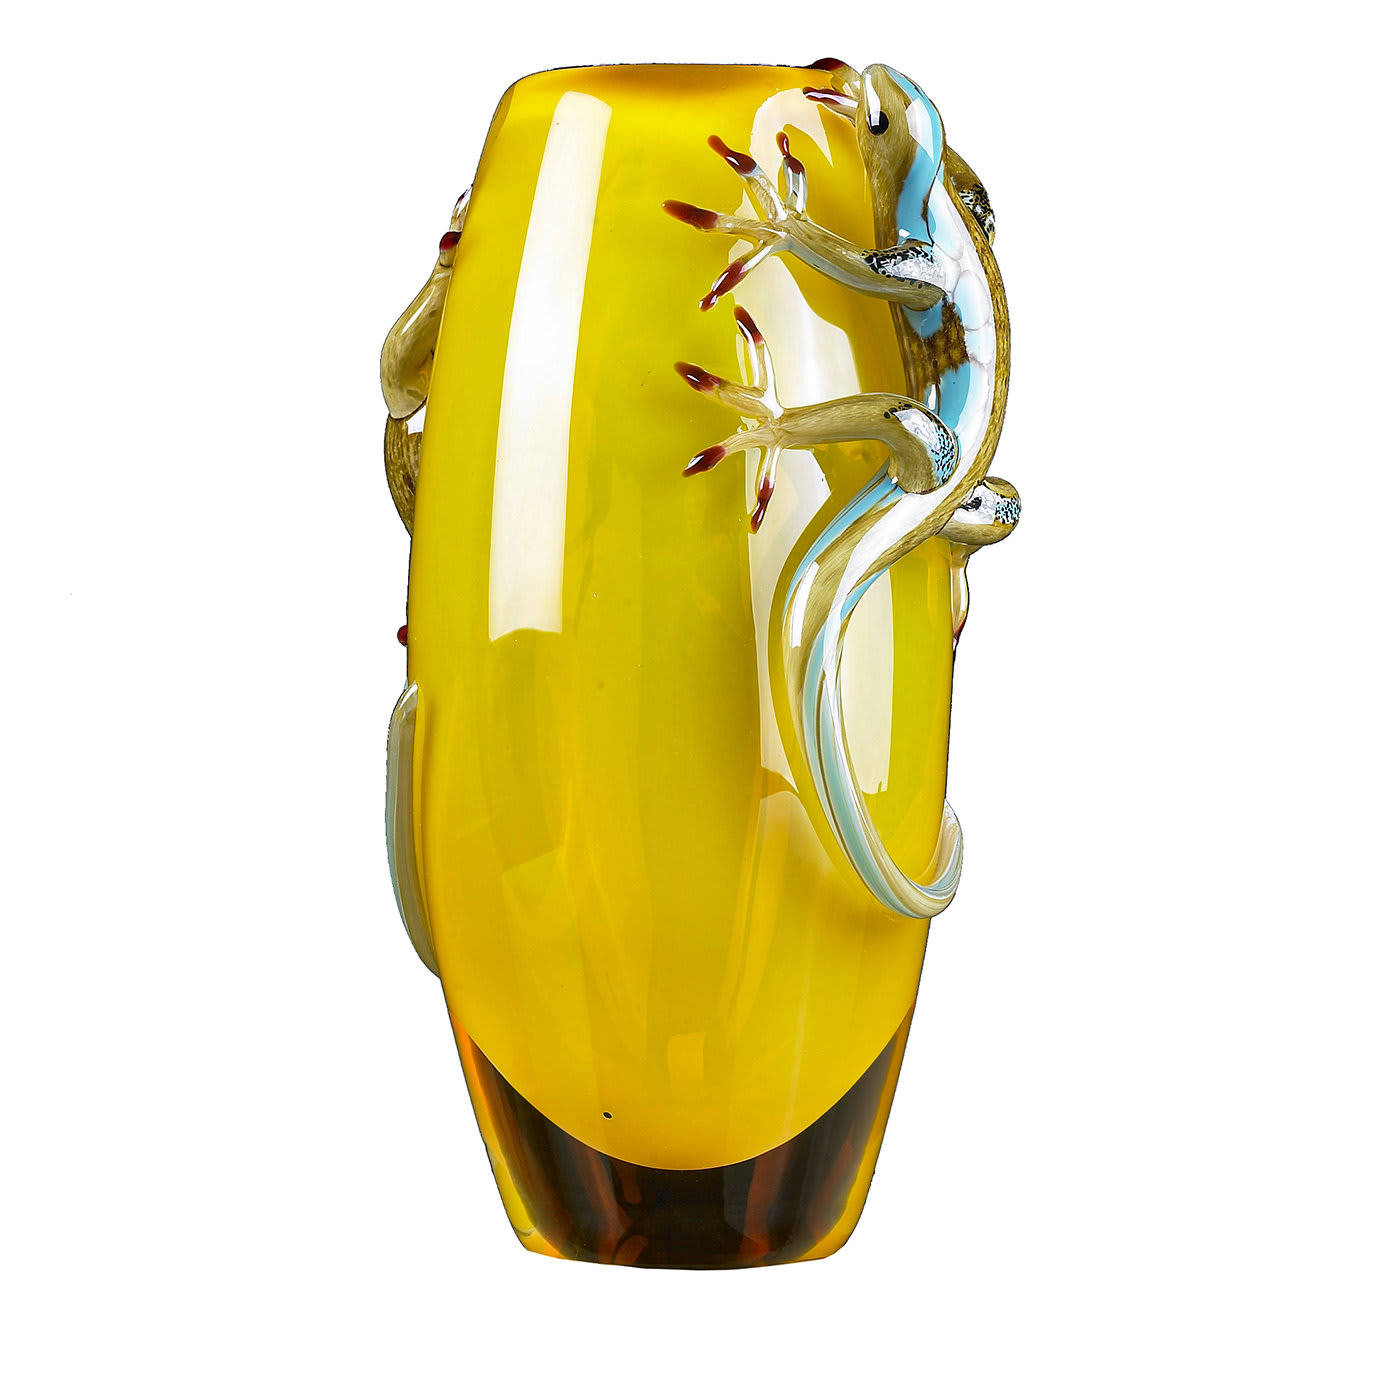 Yellow Vase with 2 Geckos - VGnewtrend